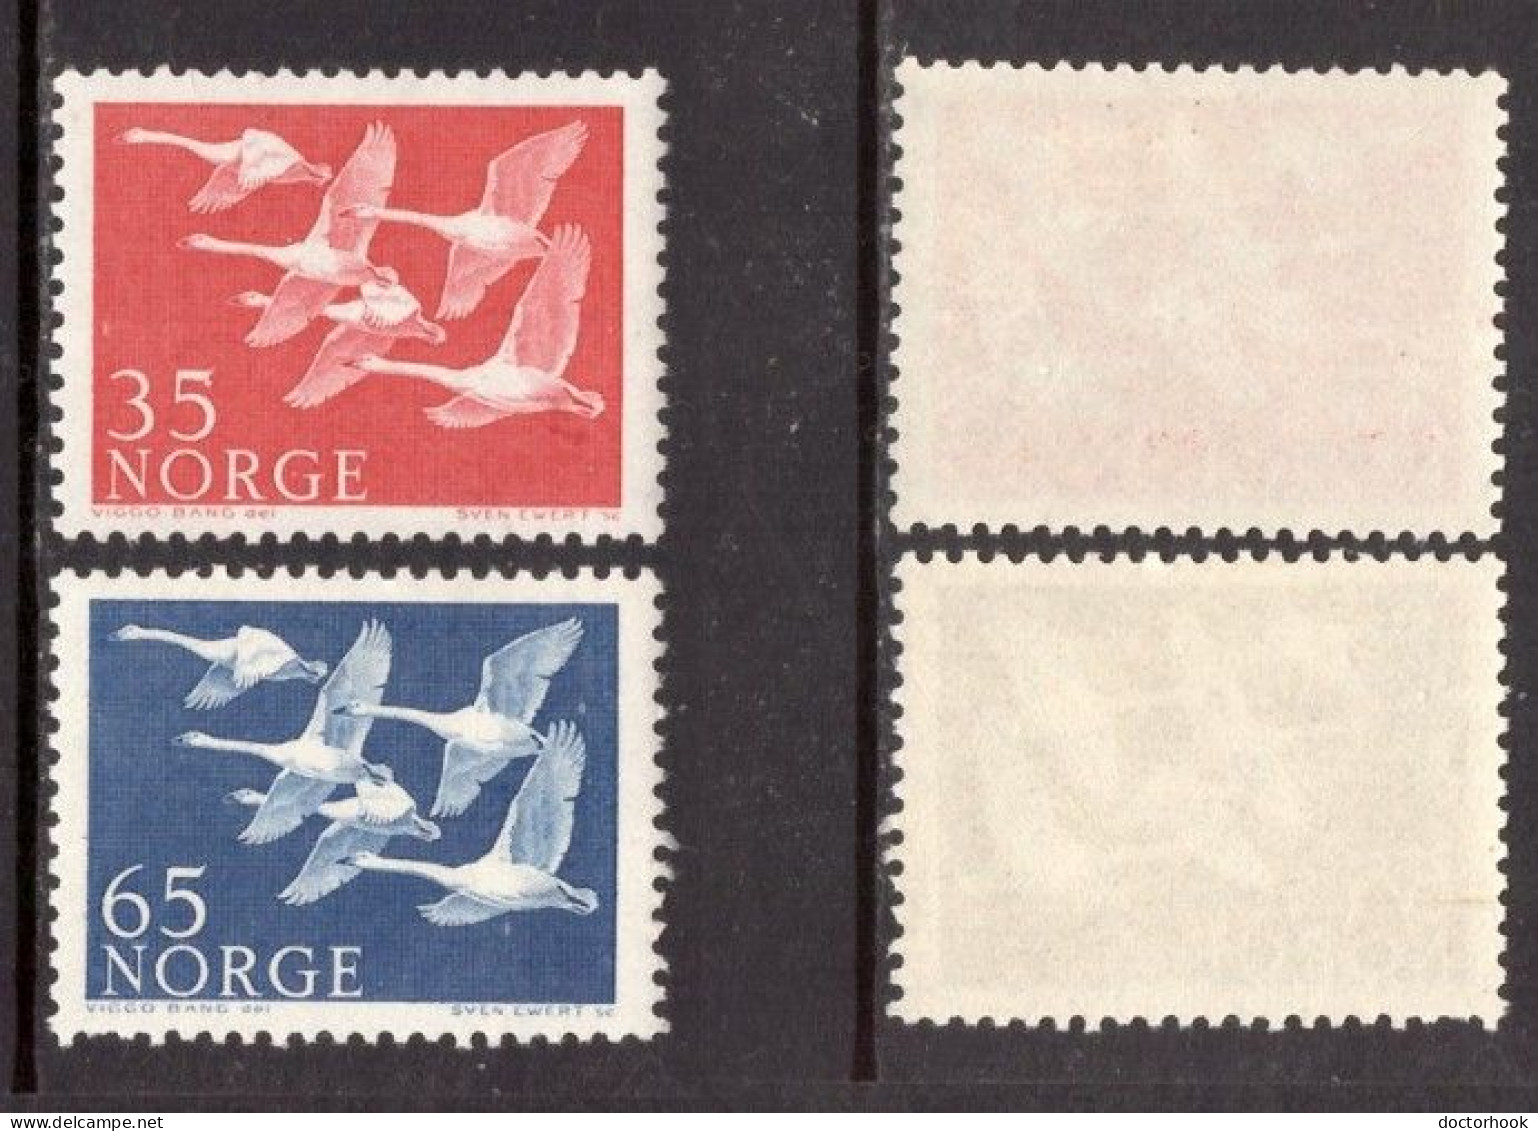 NORWAY   Scott # 353-4* MINT LH (CONDITION AS PER SCAN) (Stamp Scan # 978-19) - Nuovi